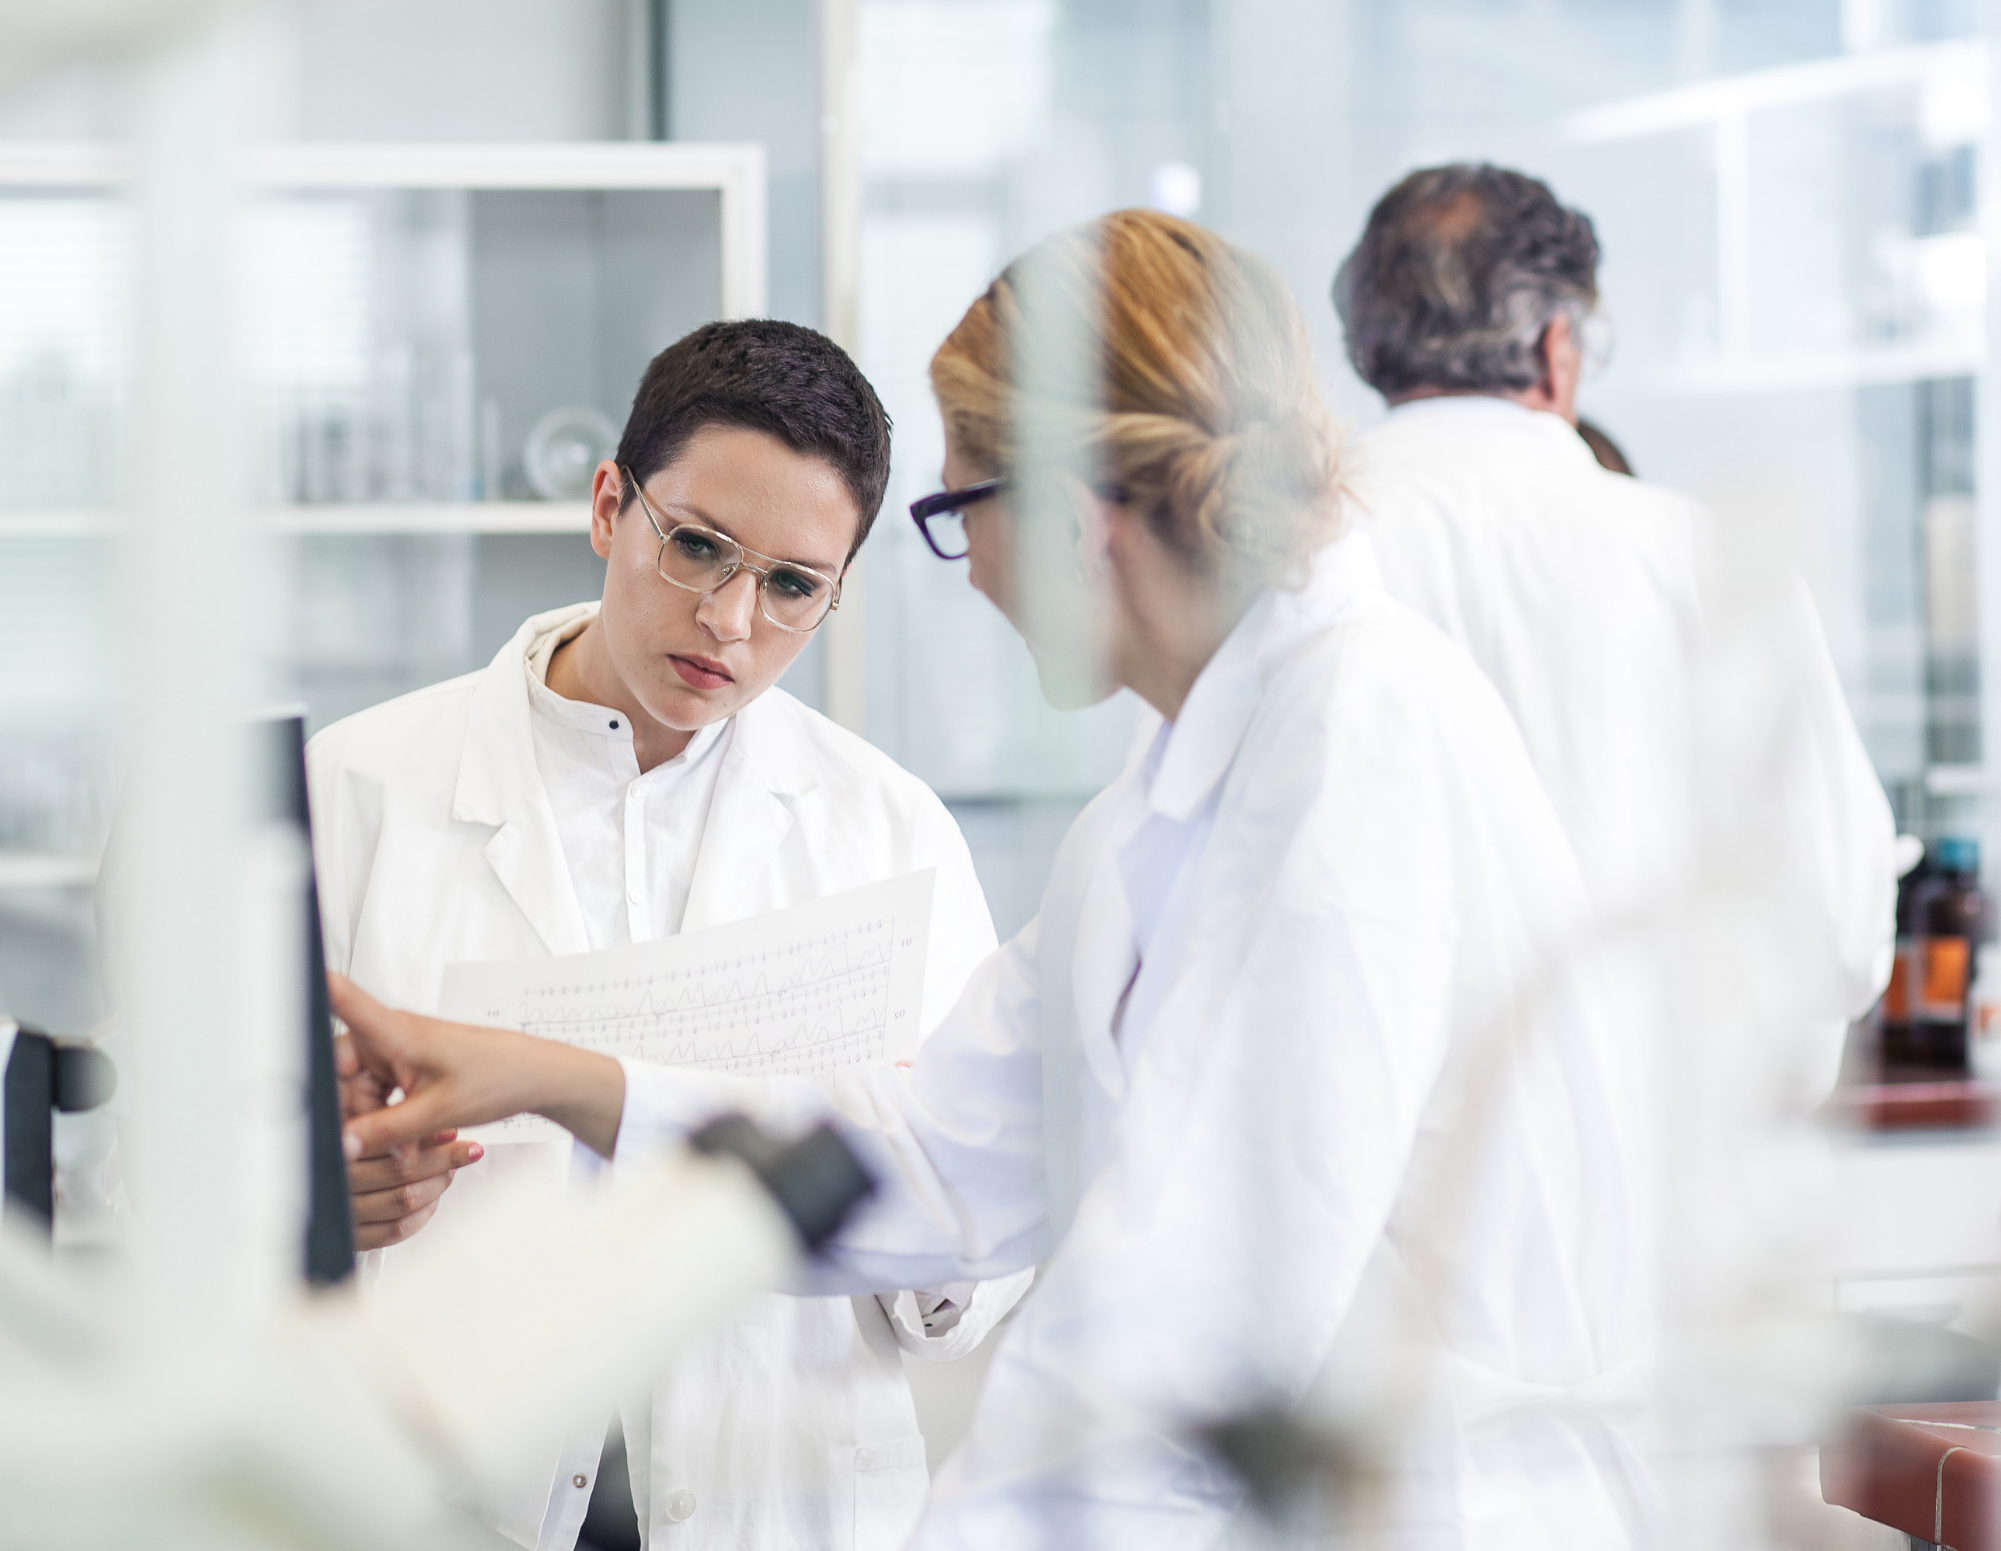 ICYMI: New resource catalogs biopharmaceutical industry lessons learned from COVID-19